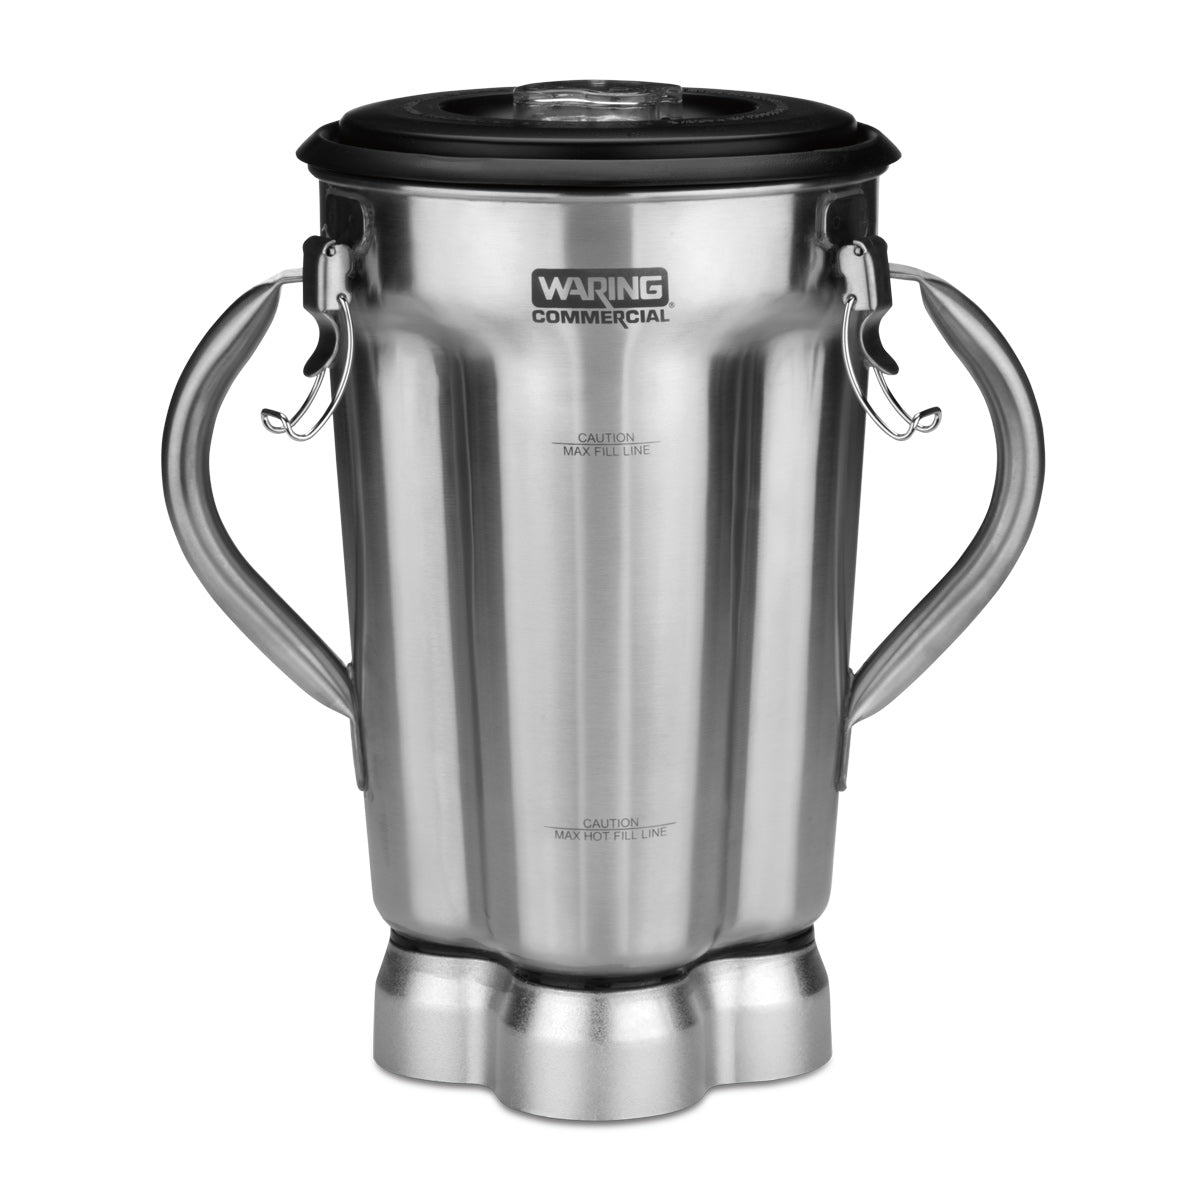 CAC72 - Two-Handle 1-Gallon Stainless Steel Container with Blade Assembly & Lid